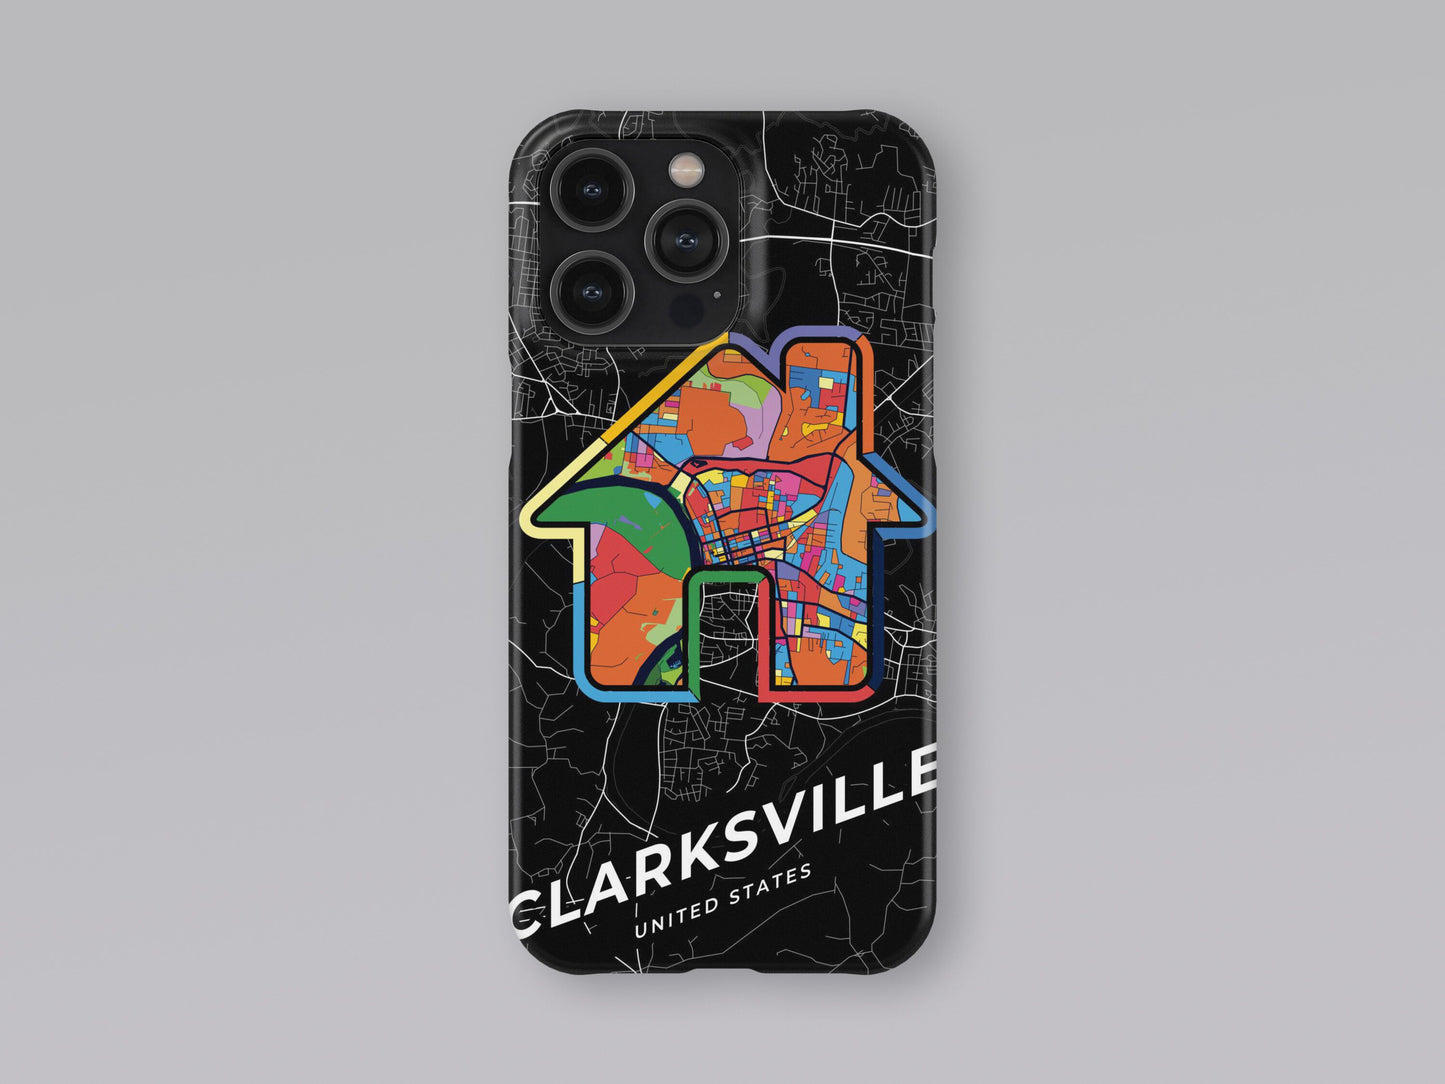 Clarksville Tennessee slim phone case with colorful icon. Birthday, wedding or housewarming gift. Couple match cases. 3